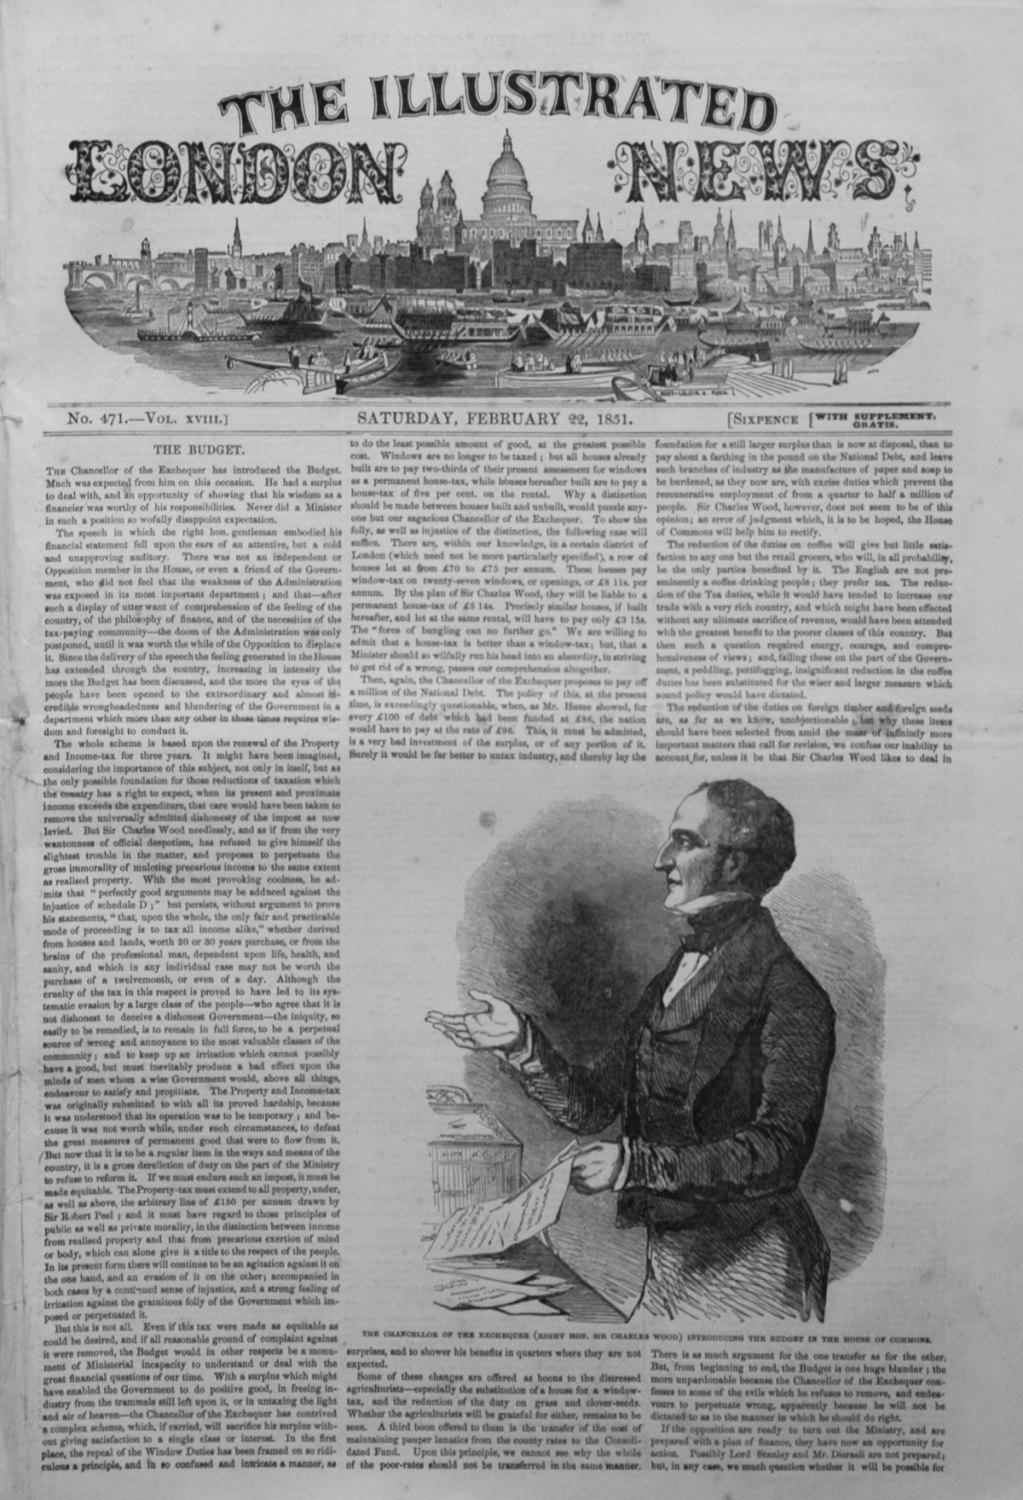 Illustrated London News February 22nd 1851.